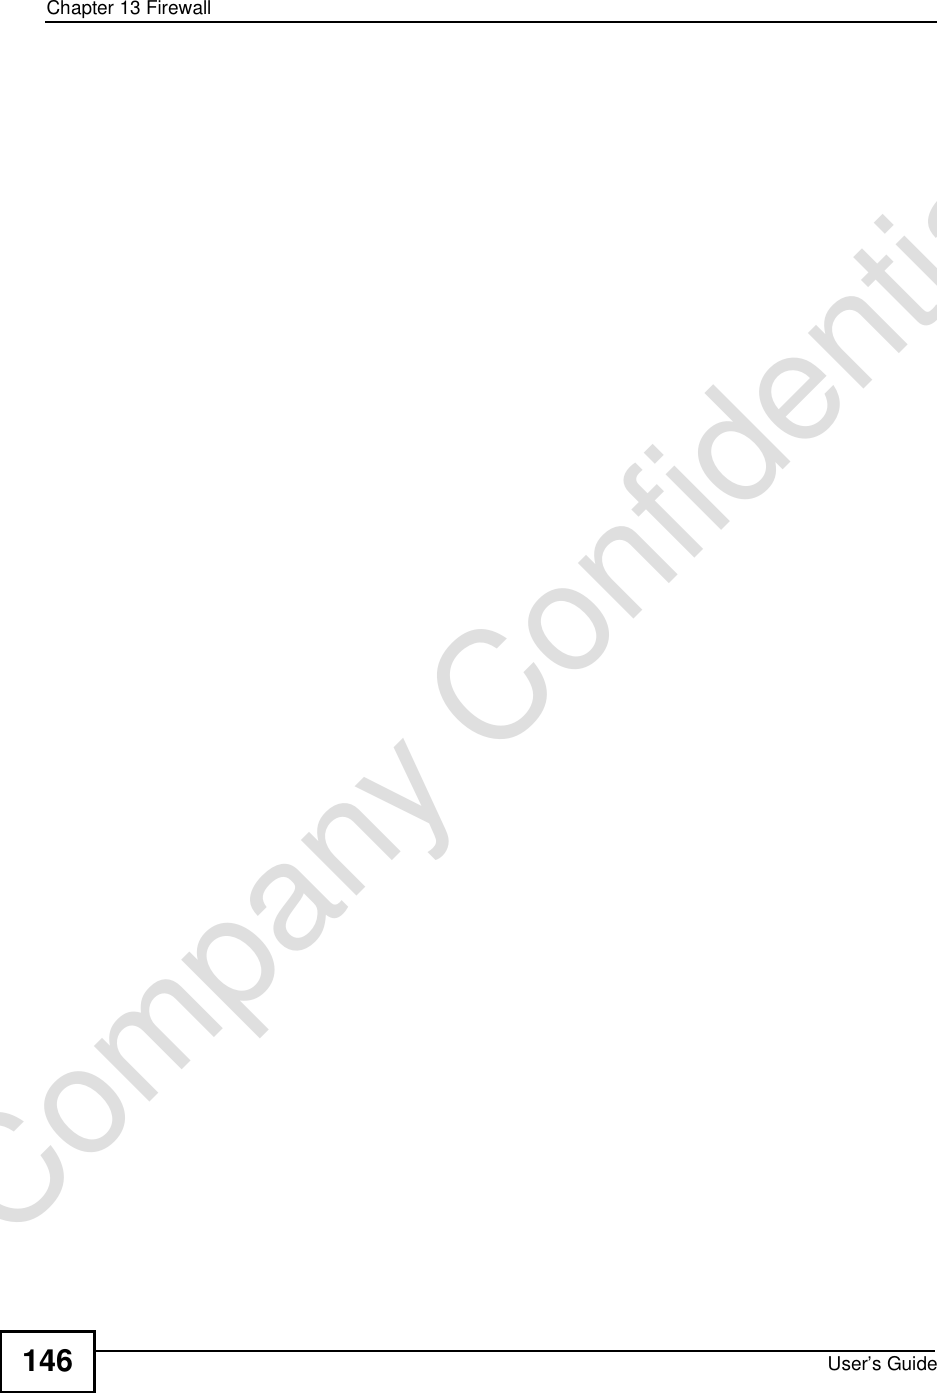 Chapter 13FirewallUser’s Guide146Company Confidential